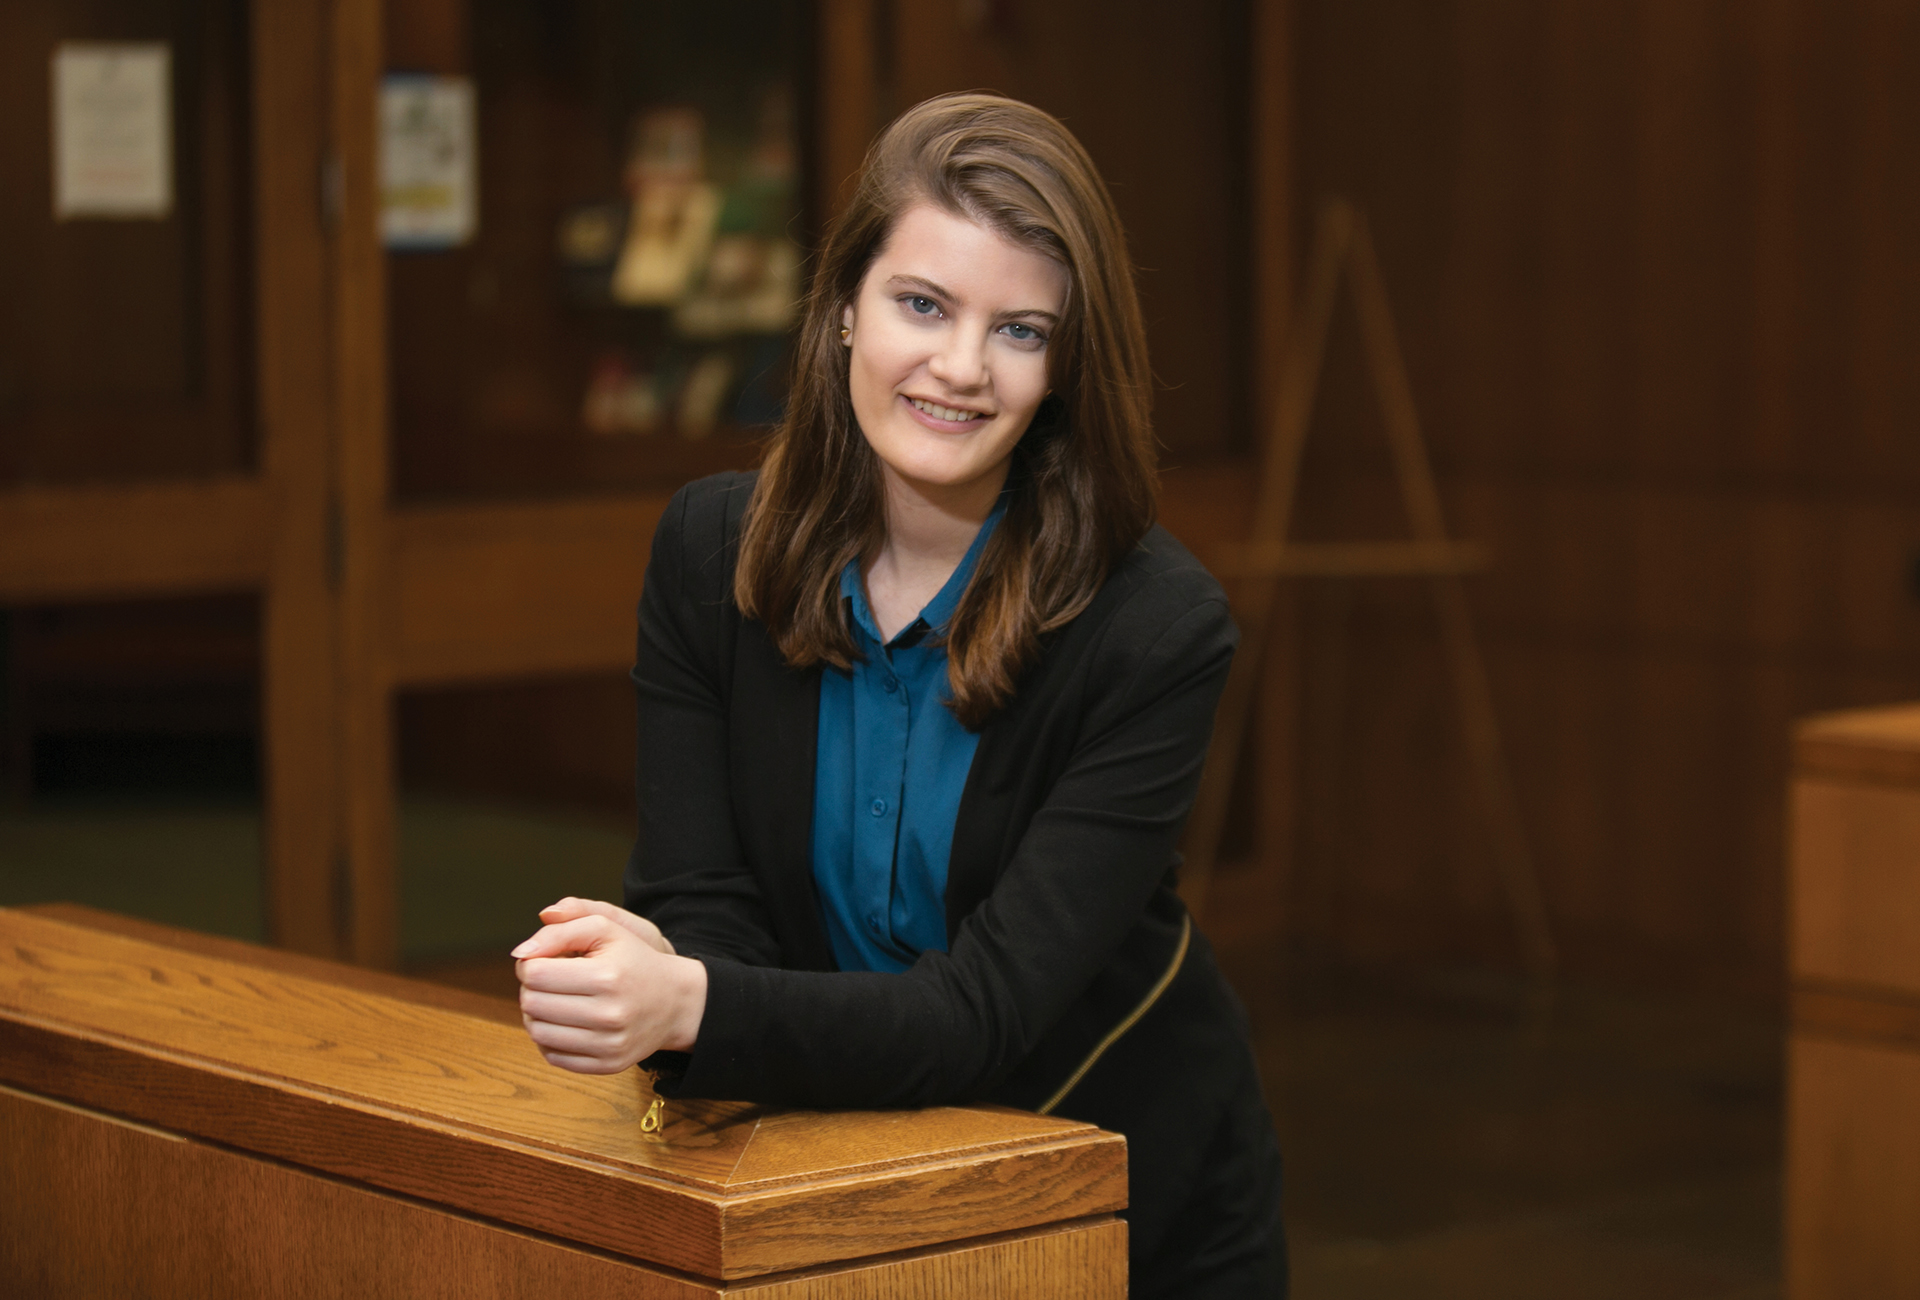 Abigail Rosenfeld ’21, the first recipient of the Lawrence A. Adelman ’78 Scholarship